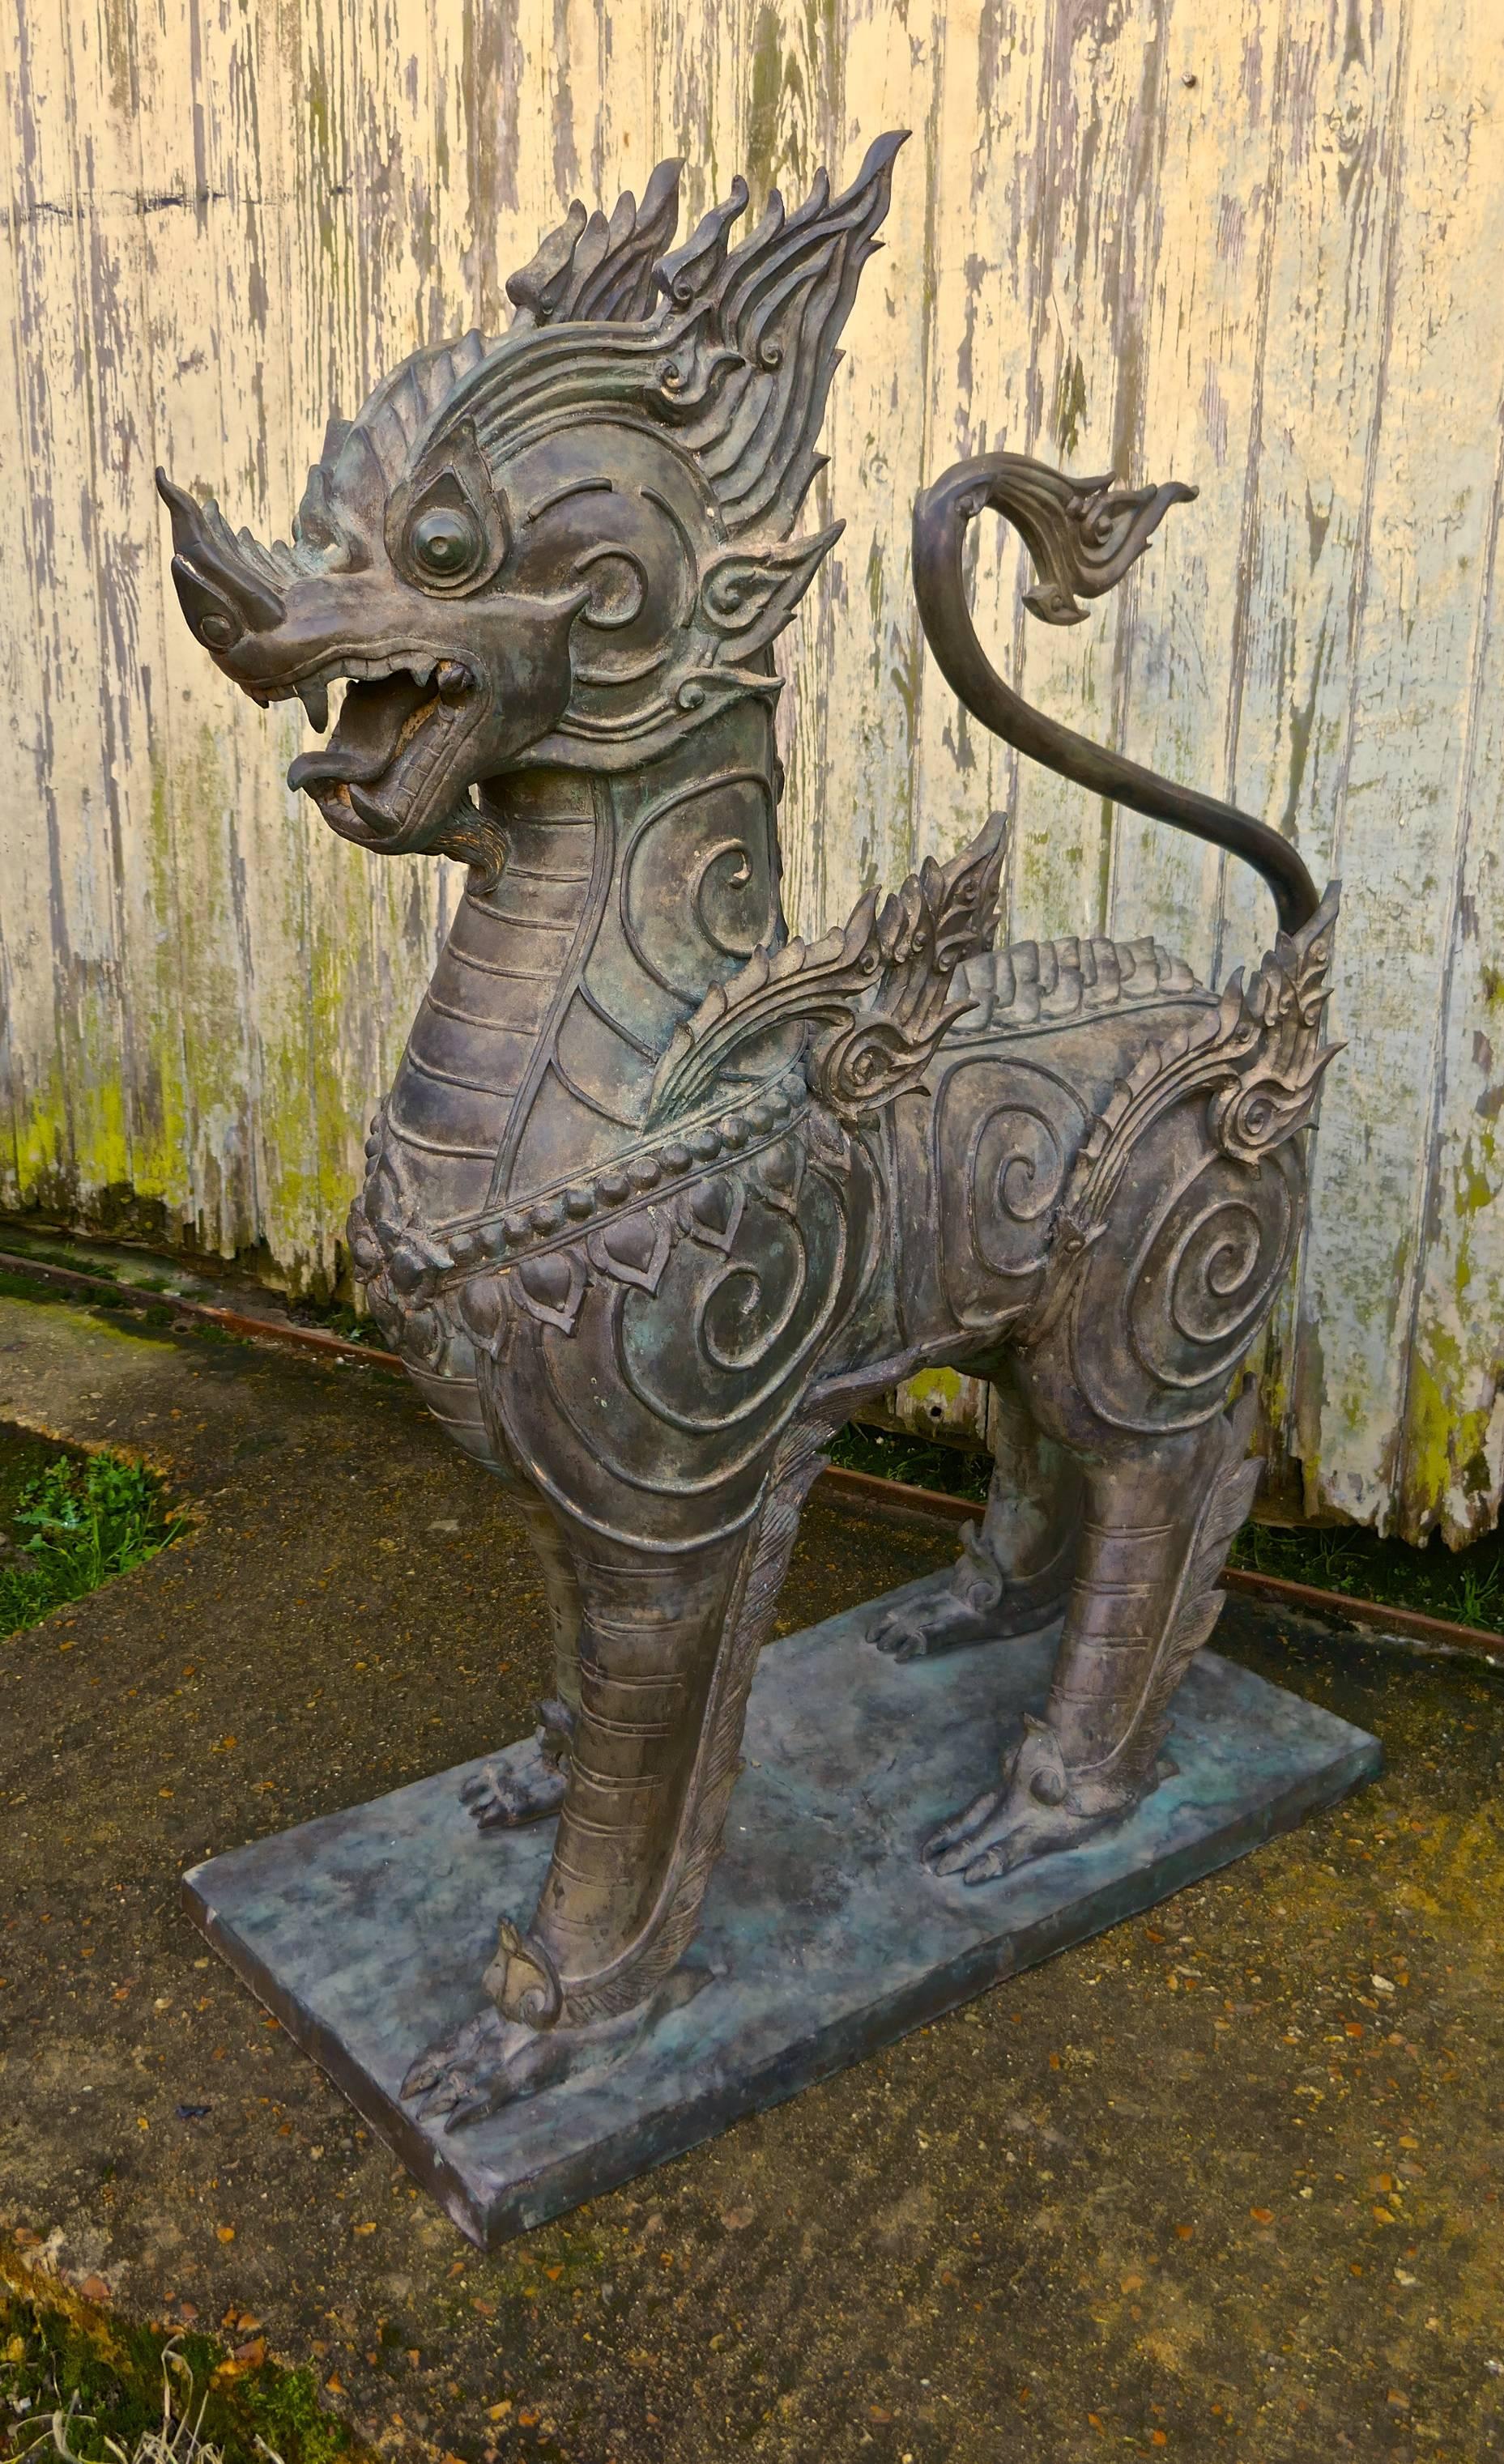 A pair of large bronze Thai temple guardian foo lion dogs

These are a very impressive pair of Singha, guardians of the Buddhist temple in Thailand, the dogs are made in bronze and are very heavy.
The dogs stand on a bronze plinth, the detail of